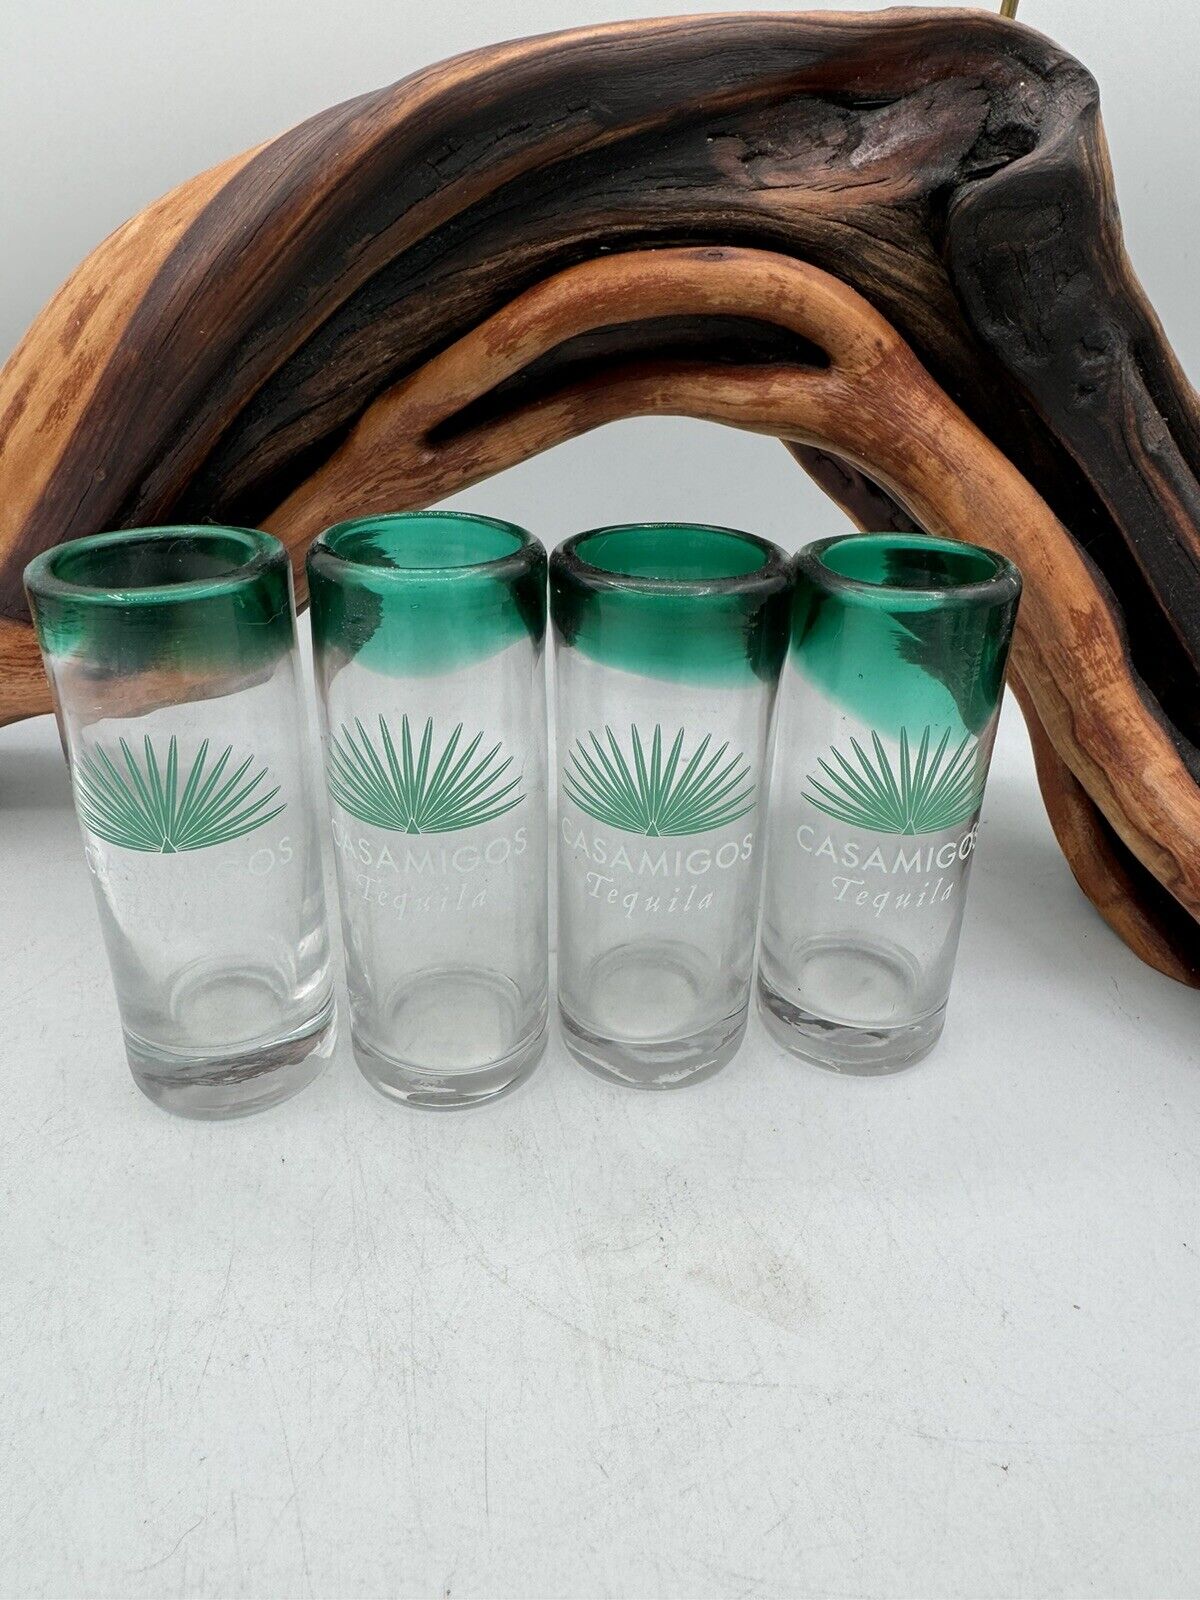 CASAMIGOS TEQUILA Lot of 4 Shot Glasses Clear with Green Rim 3oz  No Flaws